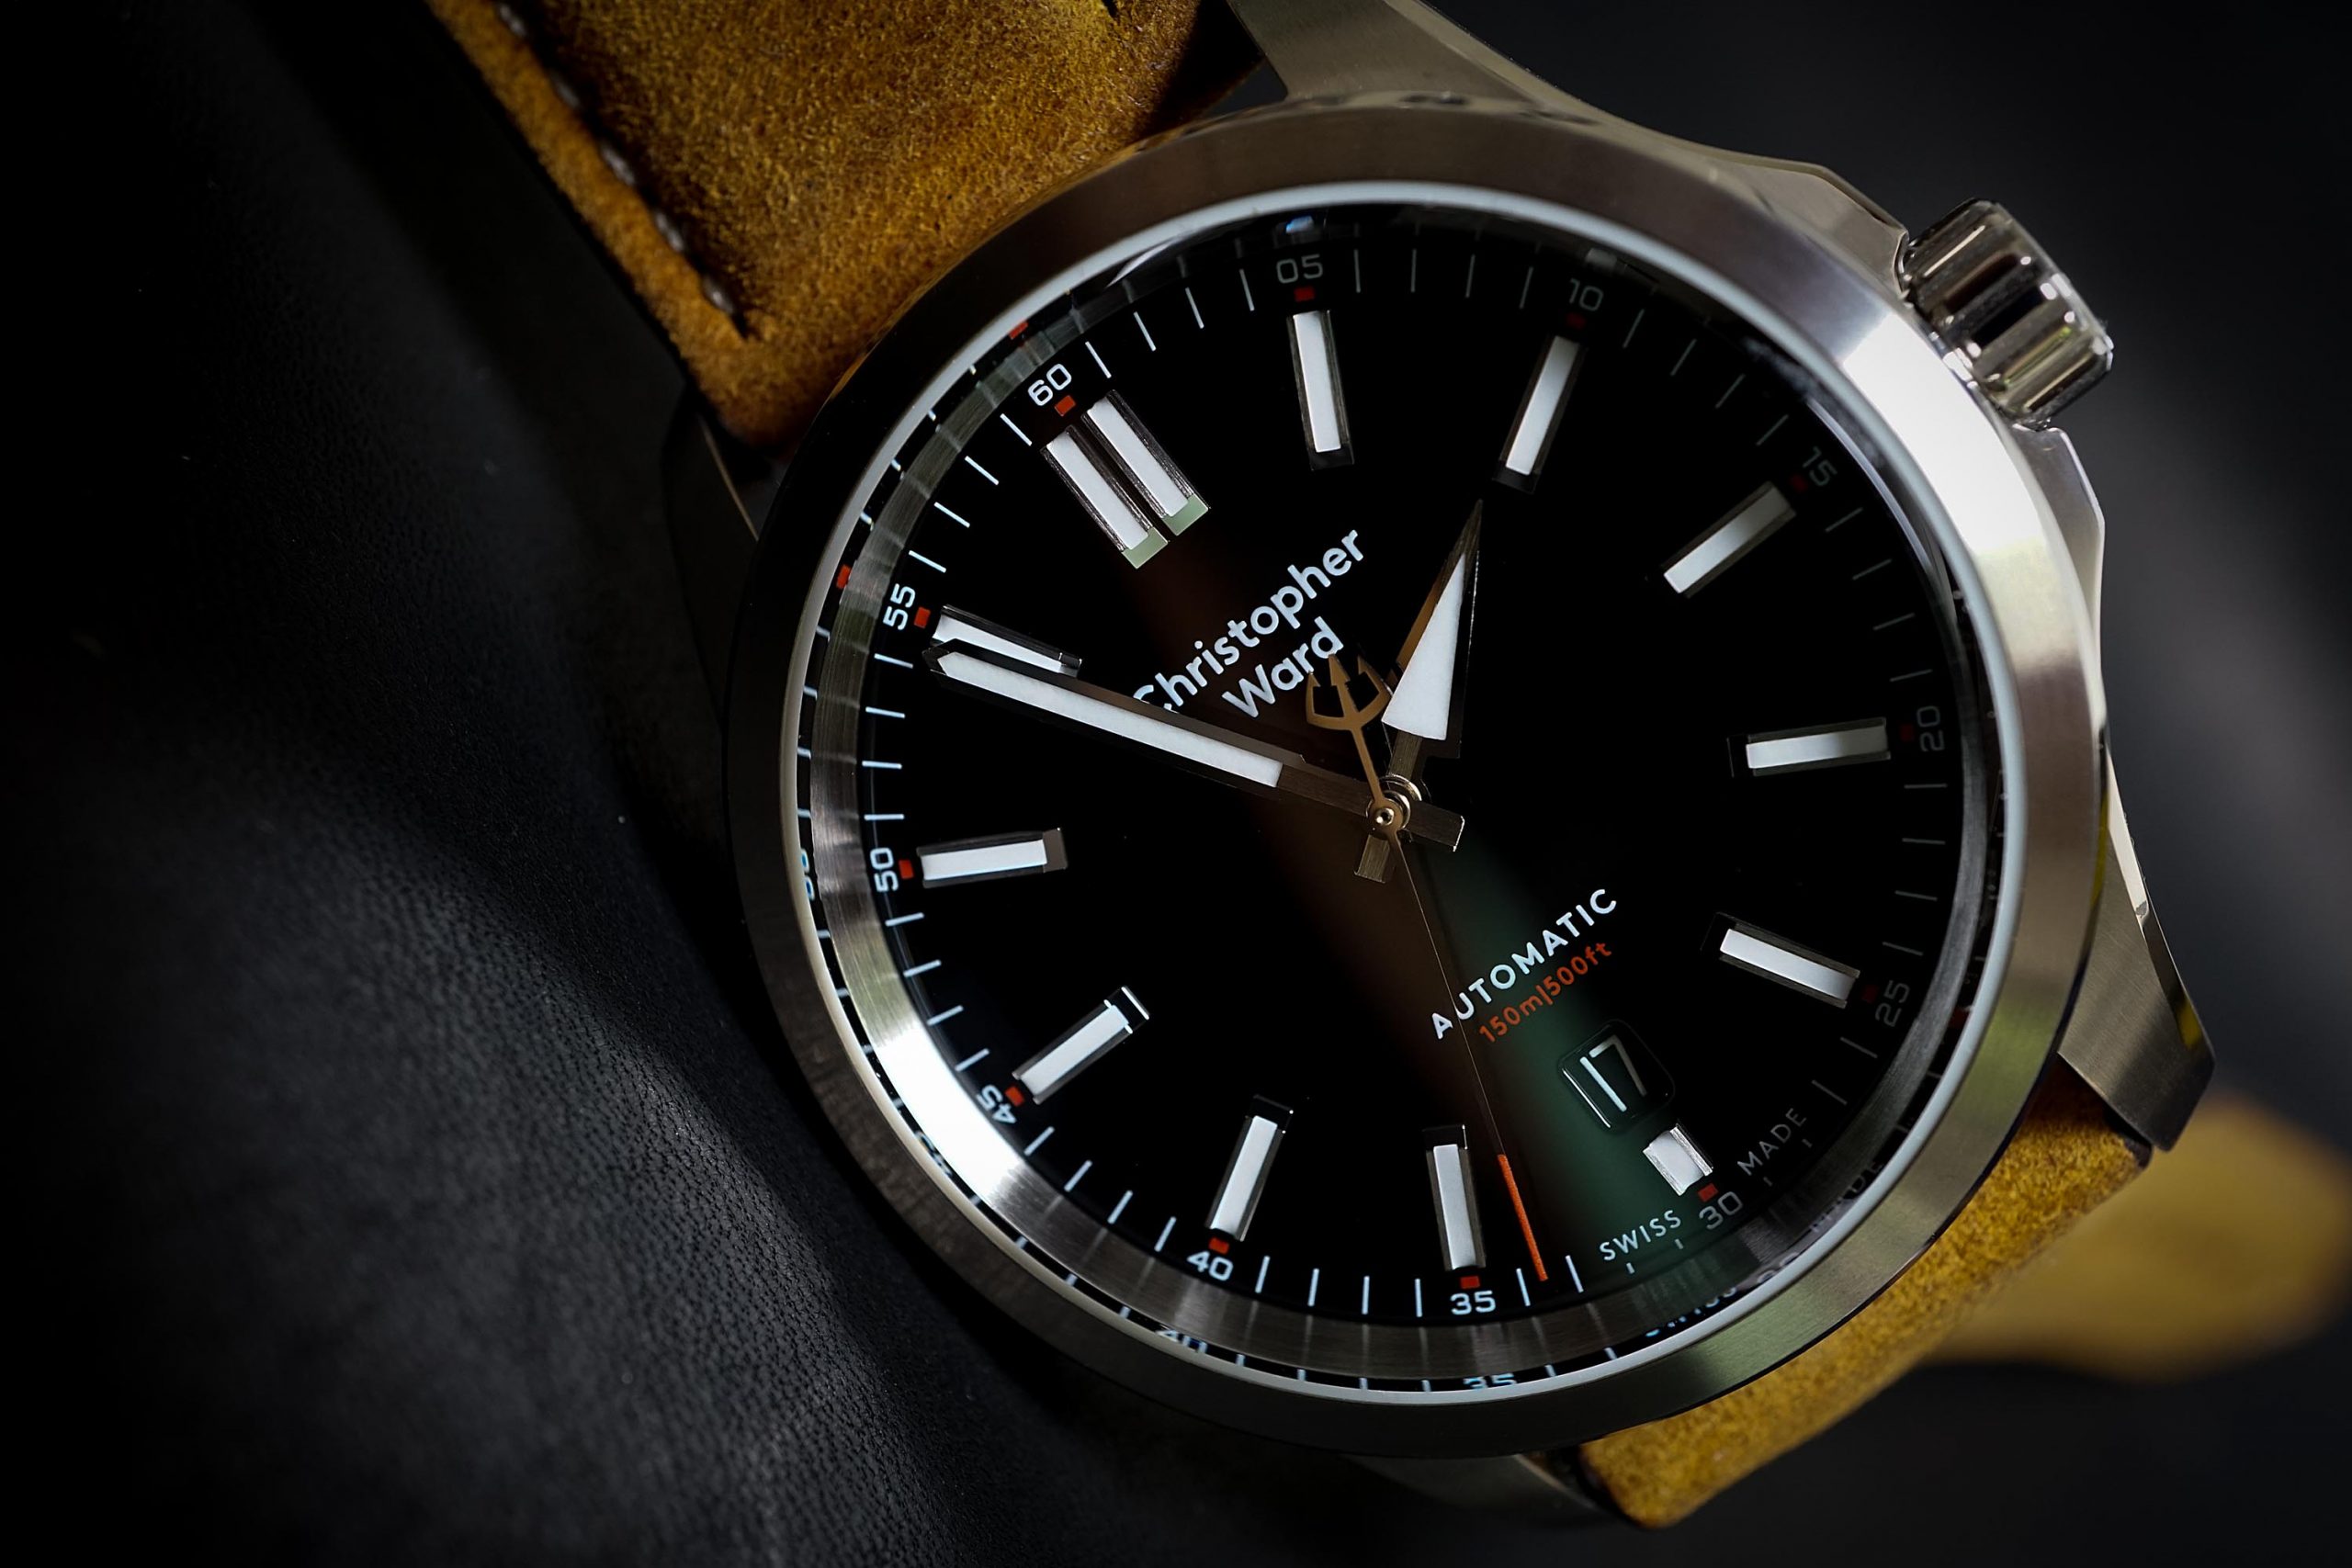 Hands-On Review C Ward C63 Sealander Automatic - BEYOND THE DIAL